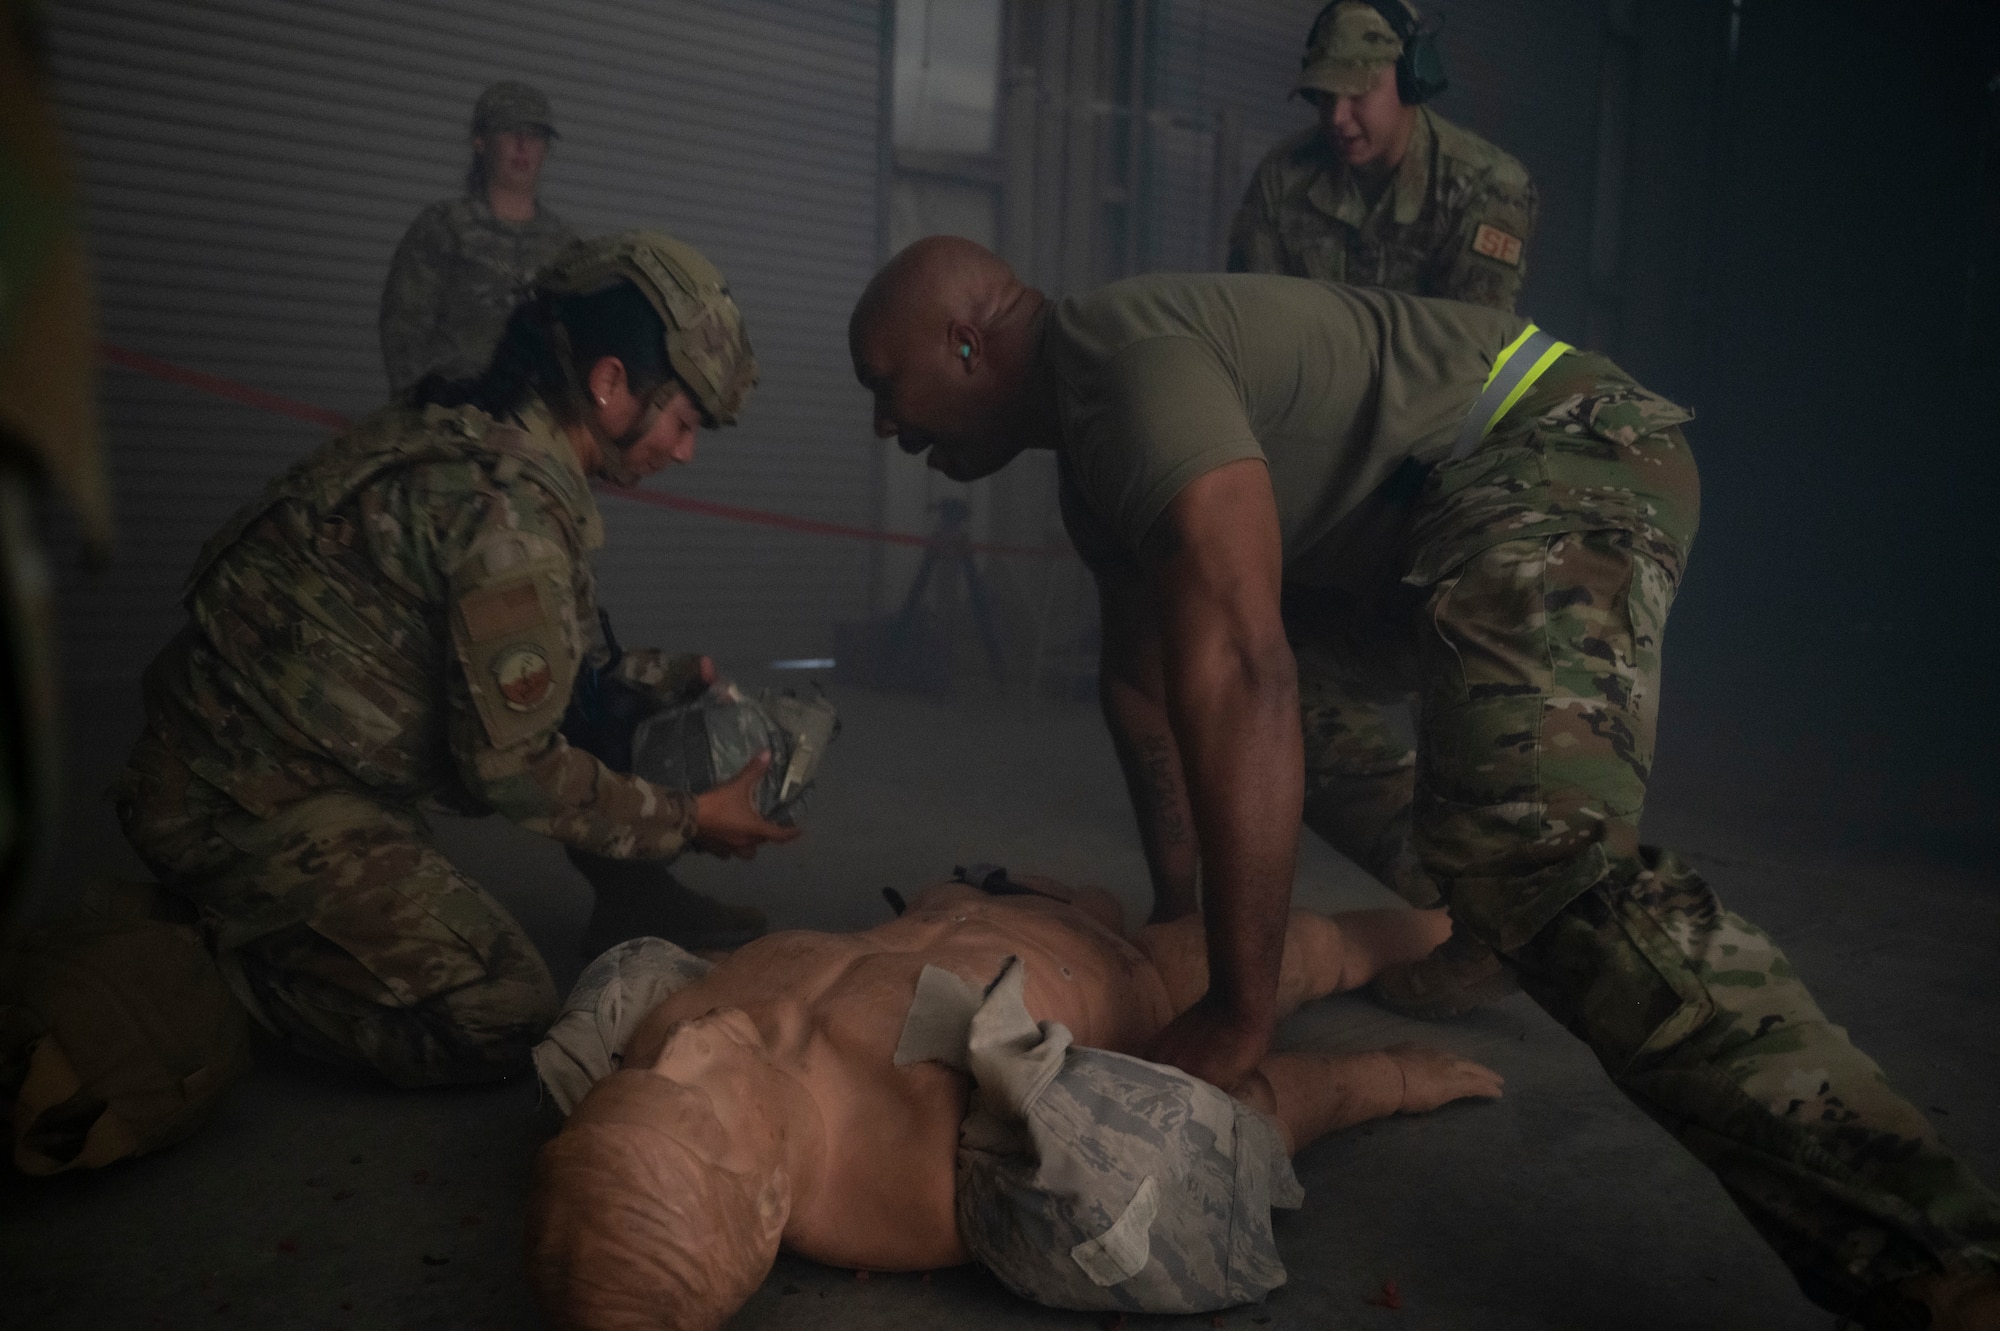 Staff Sgt. John Lundy, assigned to the 407th Expeditionary Security Forces Squadron, attempts to distract Staff Sgt. Jennifer Aleman, assigned to the 386th Expeditionary Security Forces Squadron, during Tactical Combat Casualty Care training at Al Jaber Air Base, Kuwait, Nov. 5, 2021.